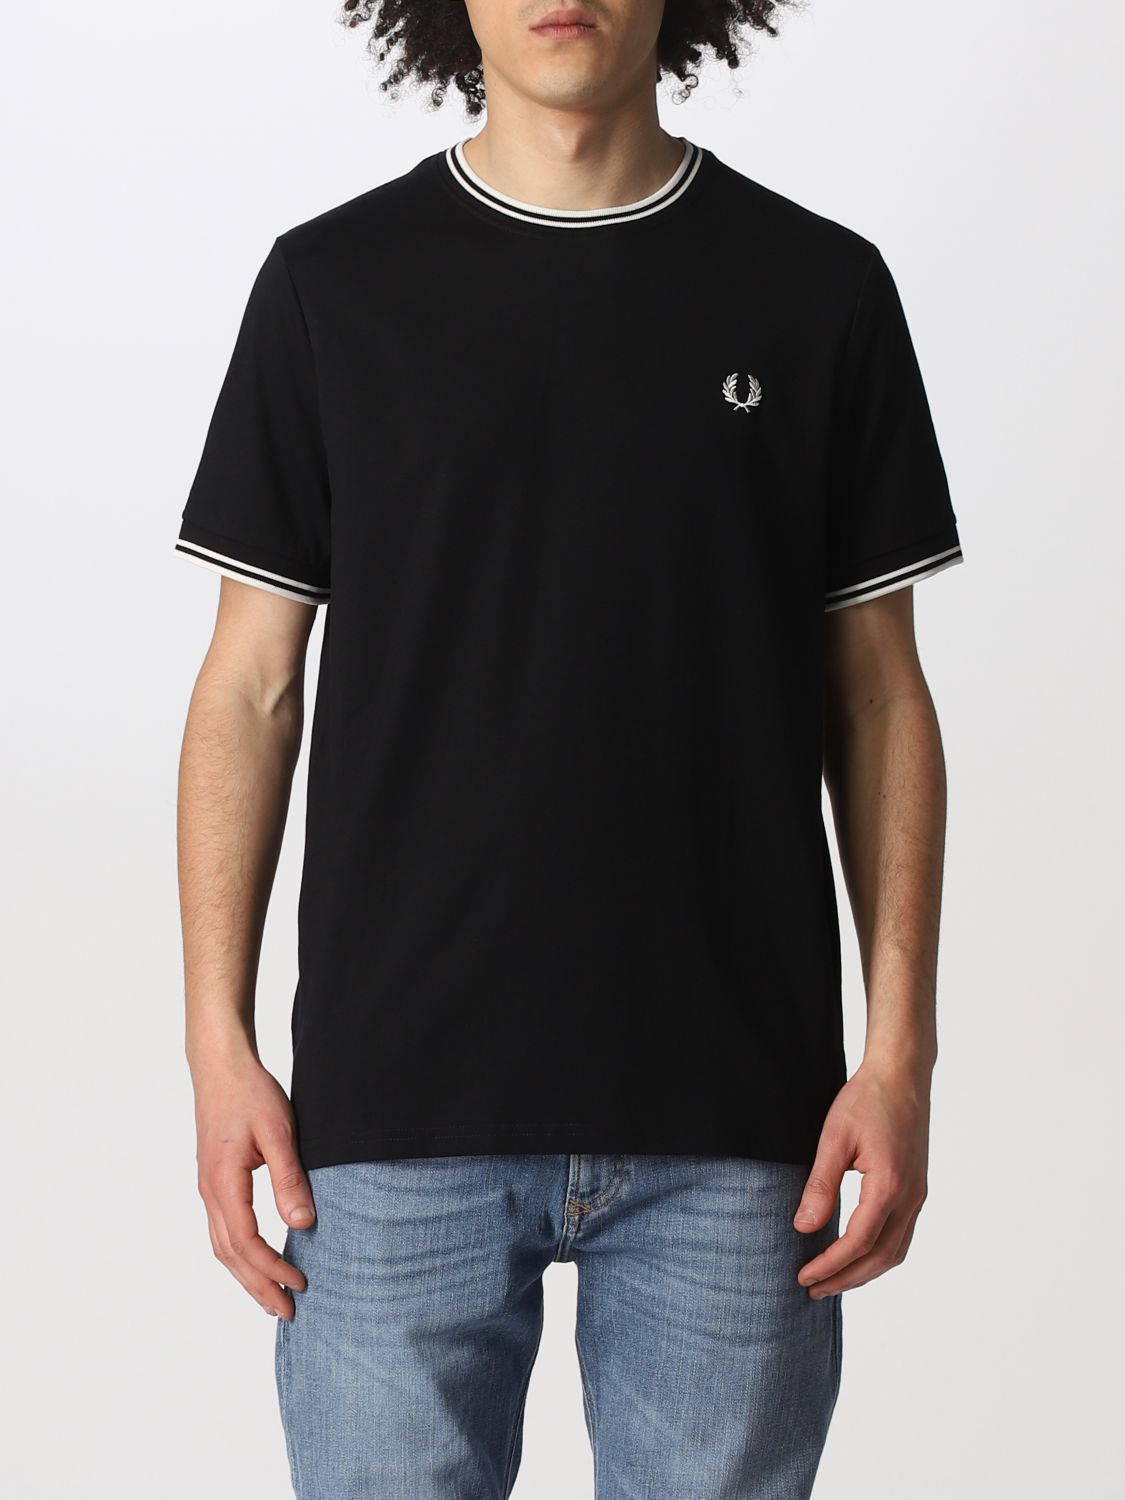 T-Shirt Fred Perry: Fred Perry Herren T-Shirt schwarz 1